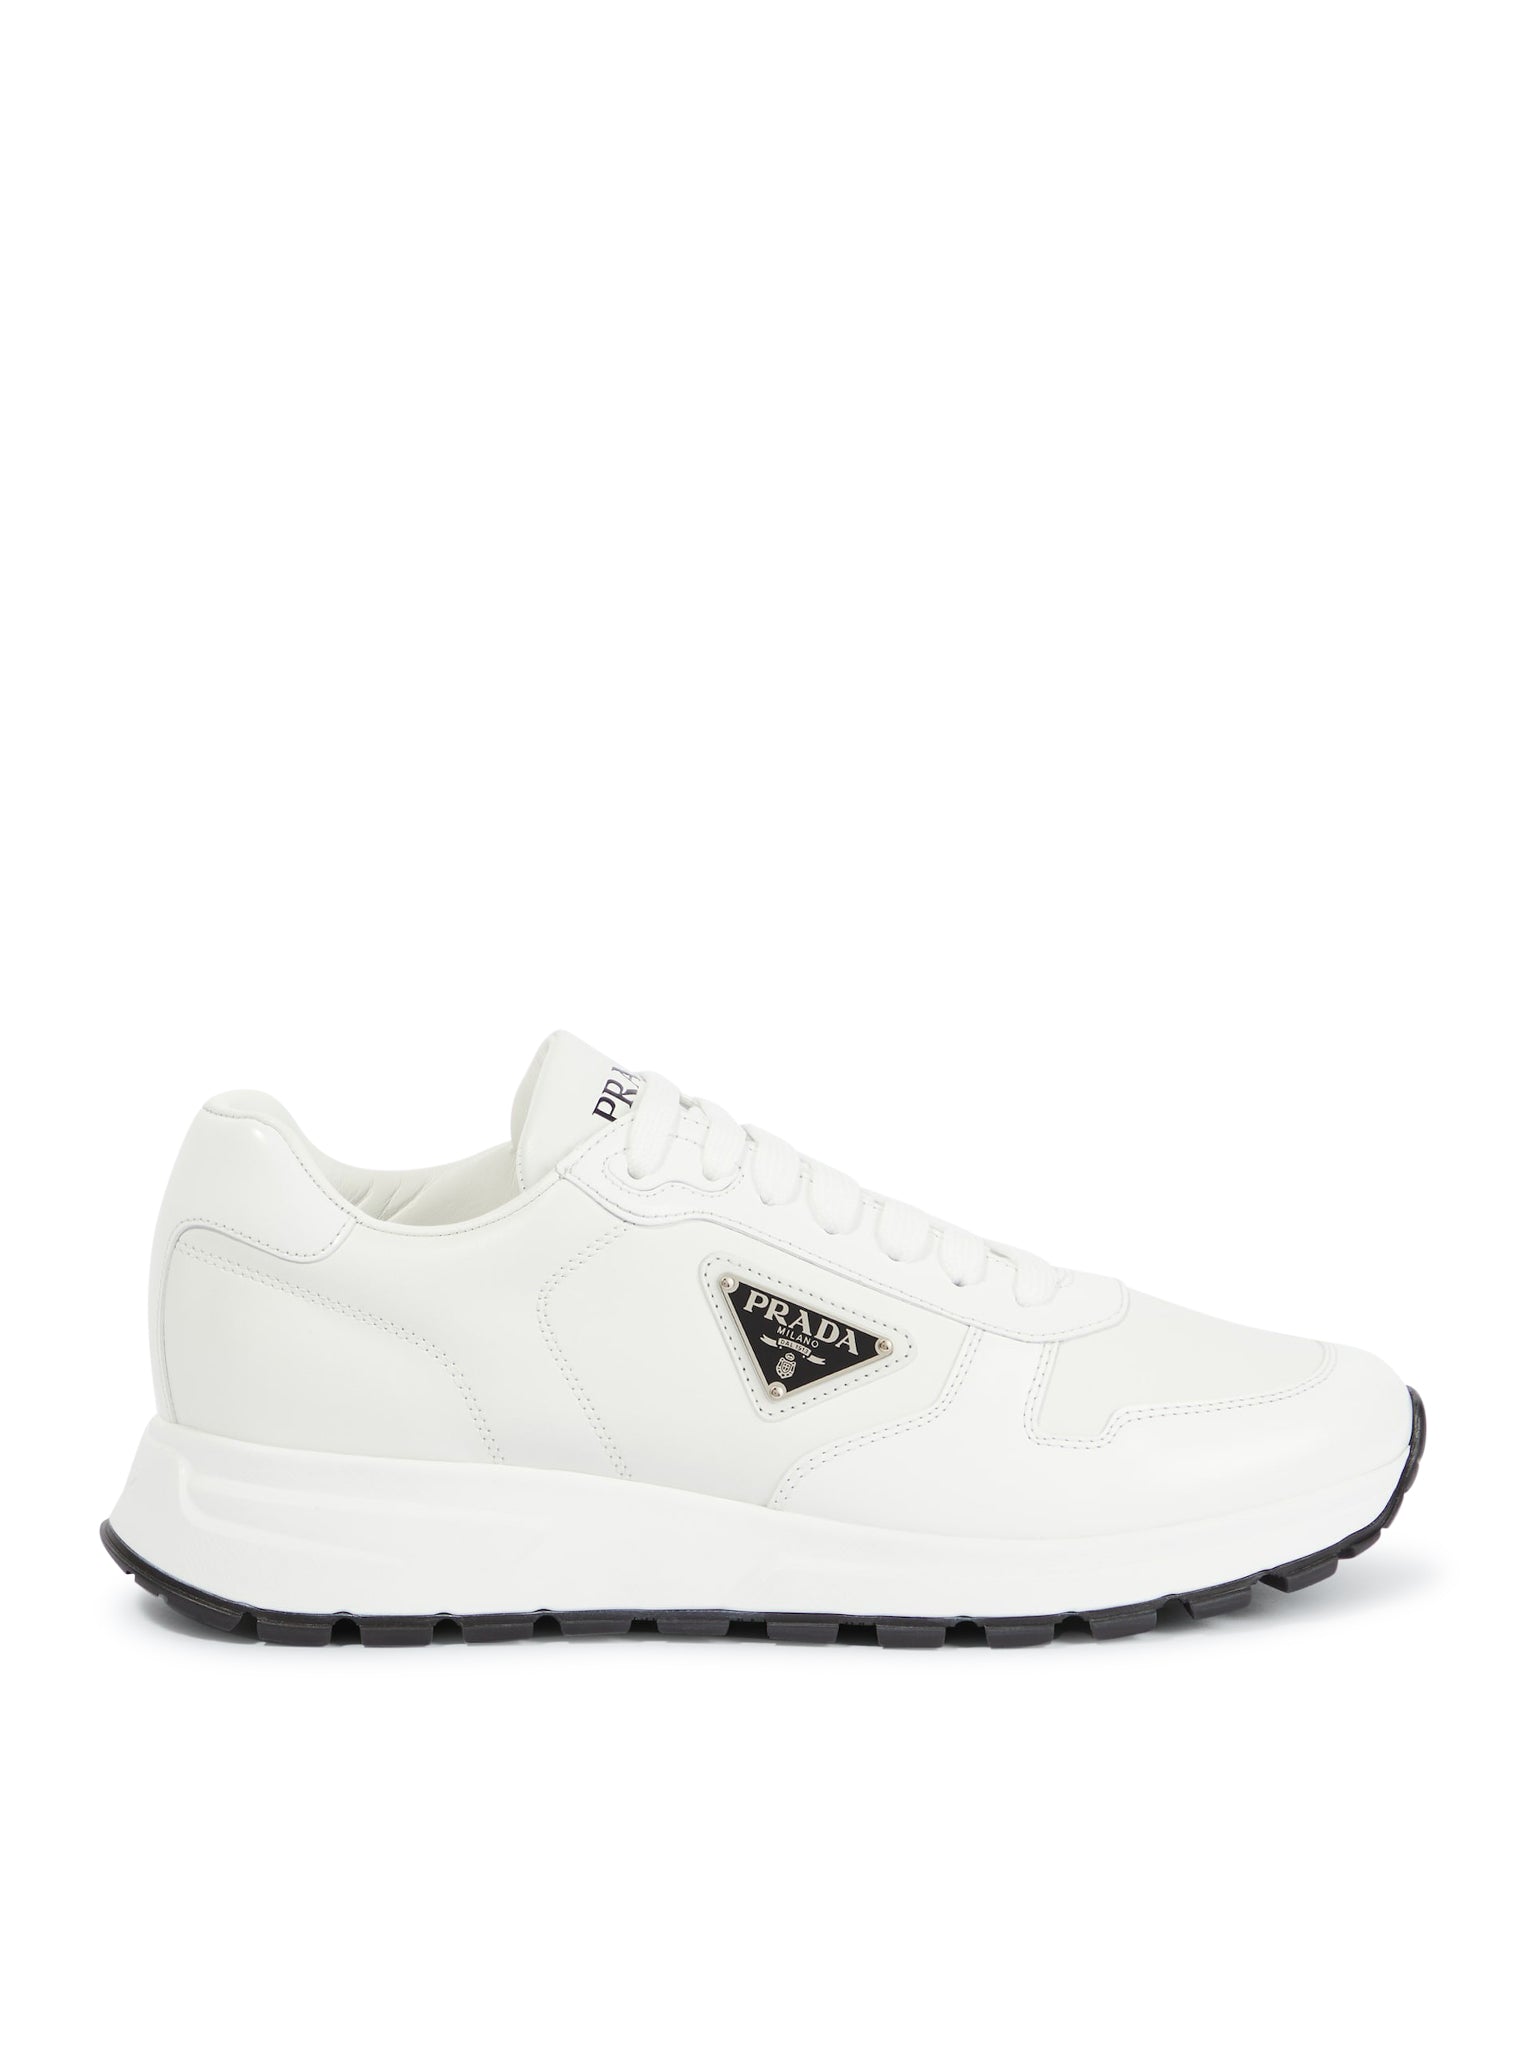 Prada PRAX 1 sneakers in Re-Nylon and brushed leather